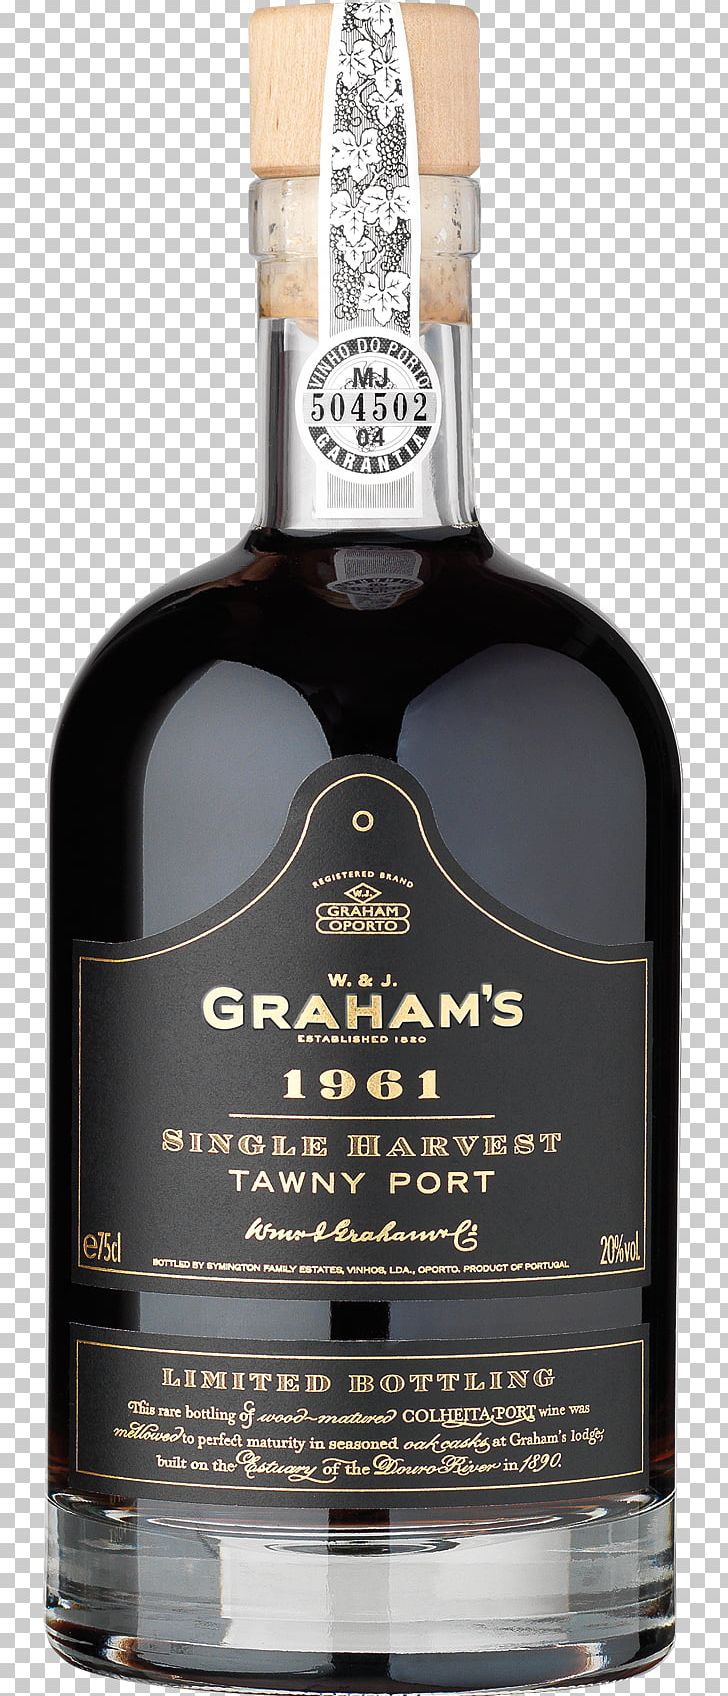 Tennessee Whiskey Port Wine Bottle Graham’s PNG, Clipart, Port Wine, Tennessee Whiskey, Wine Bottle Free PNG Download